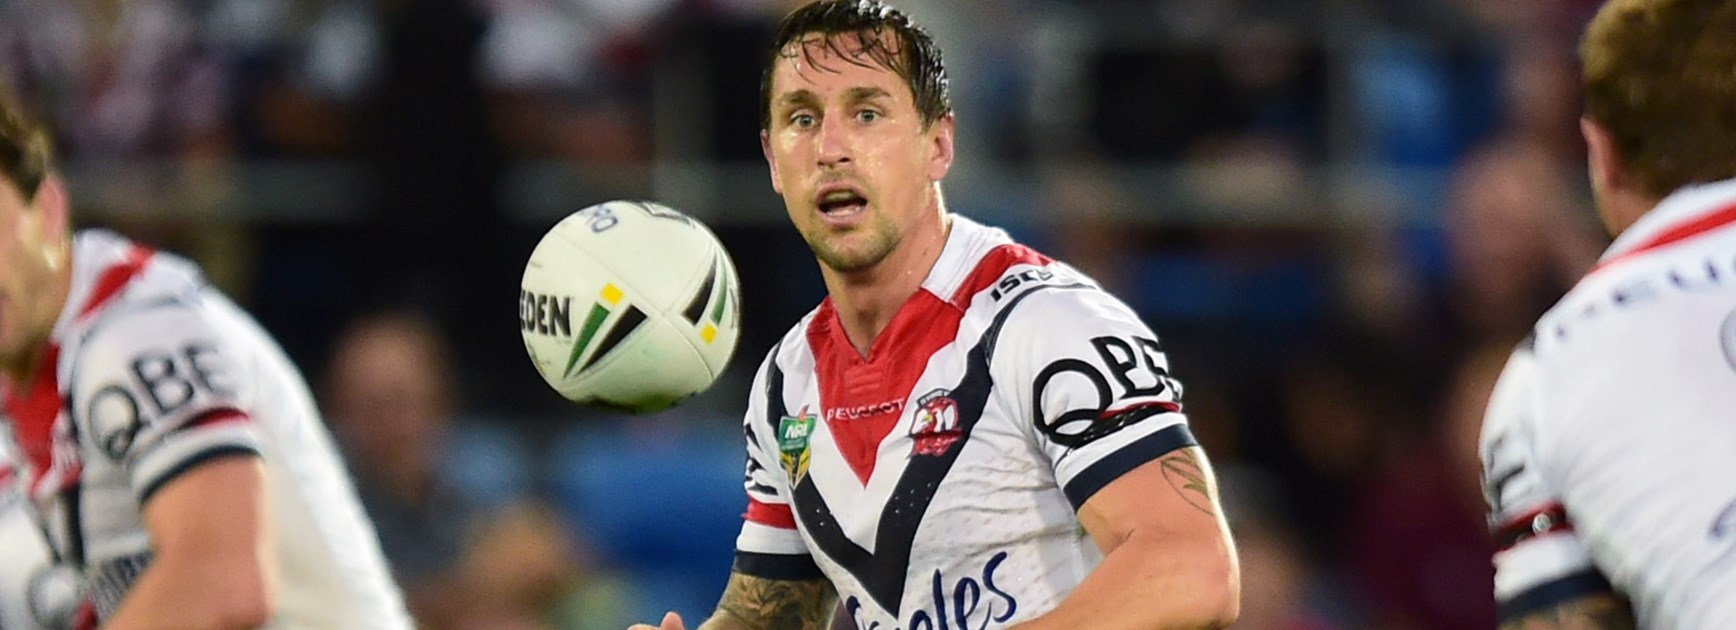 Roosters halfback Mitchell Pearce against the Titans in Round 10.